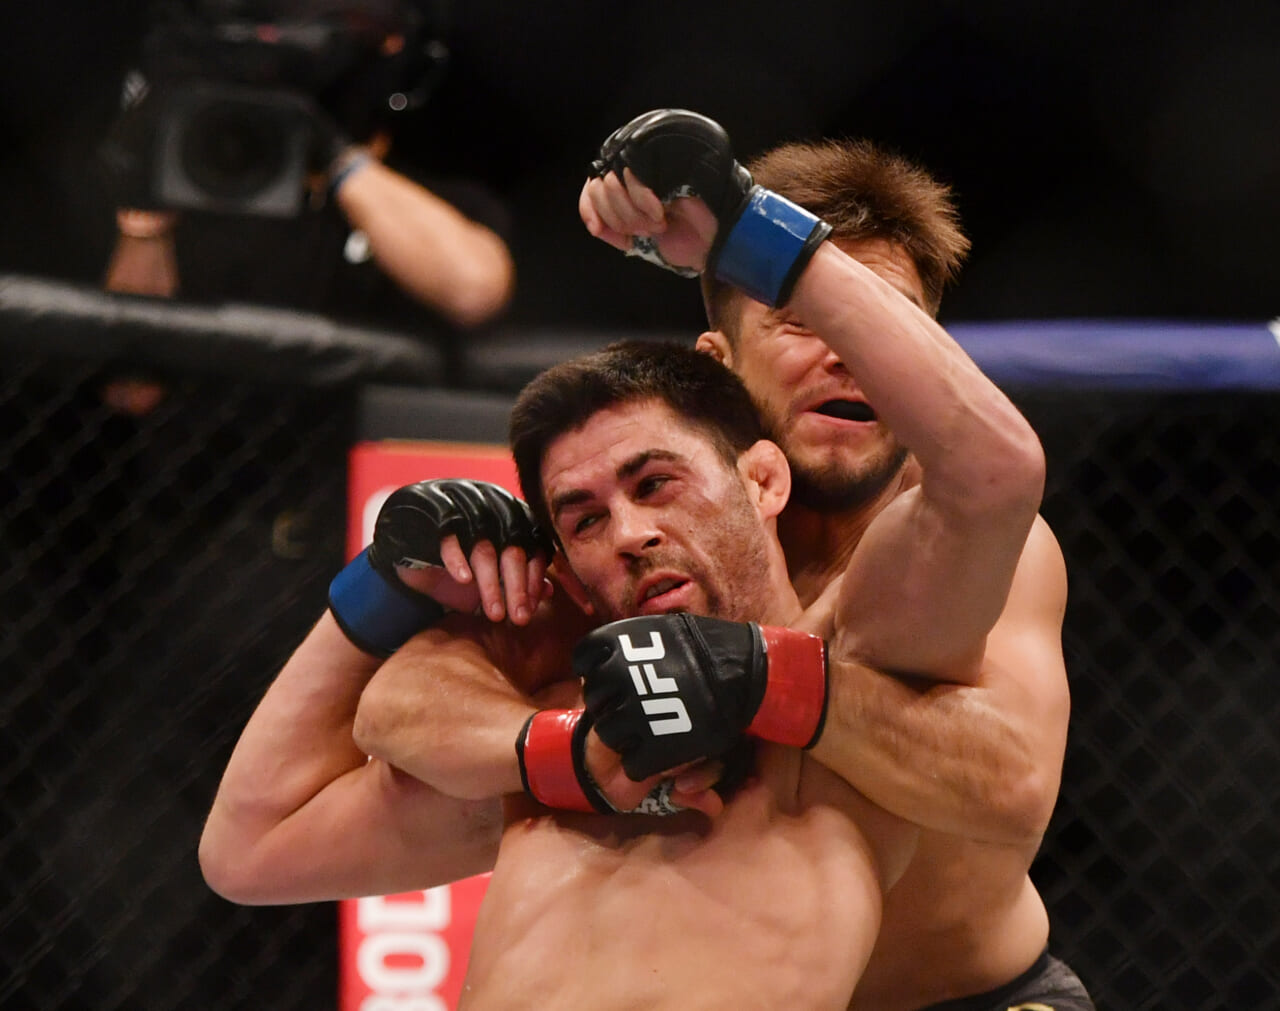 Will we see the UFC return of Henry Cejudo in 2022?